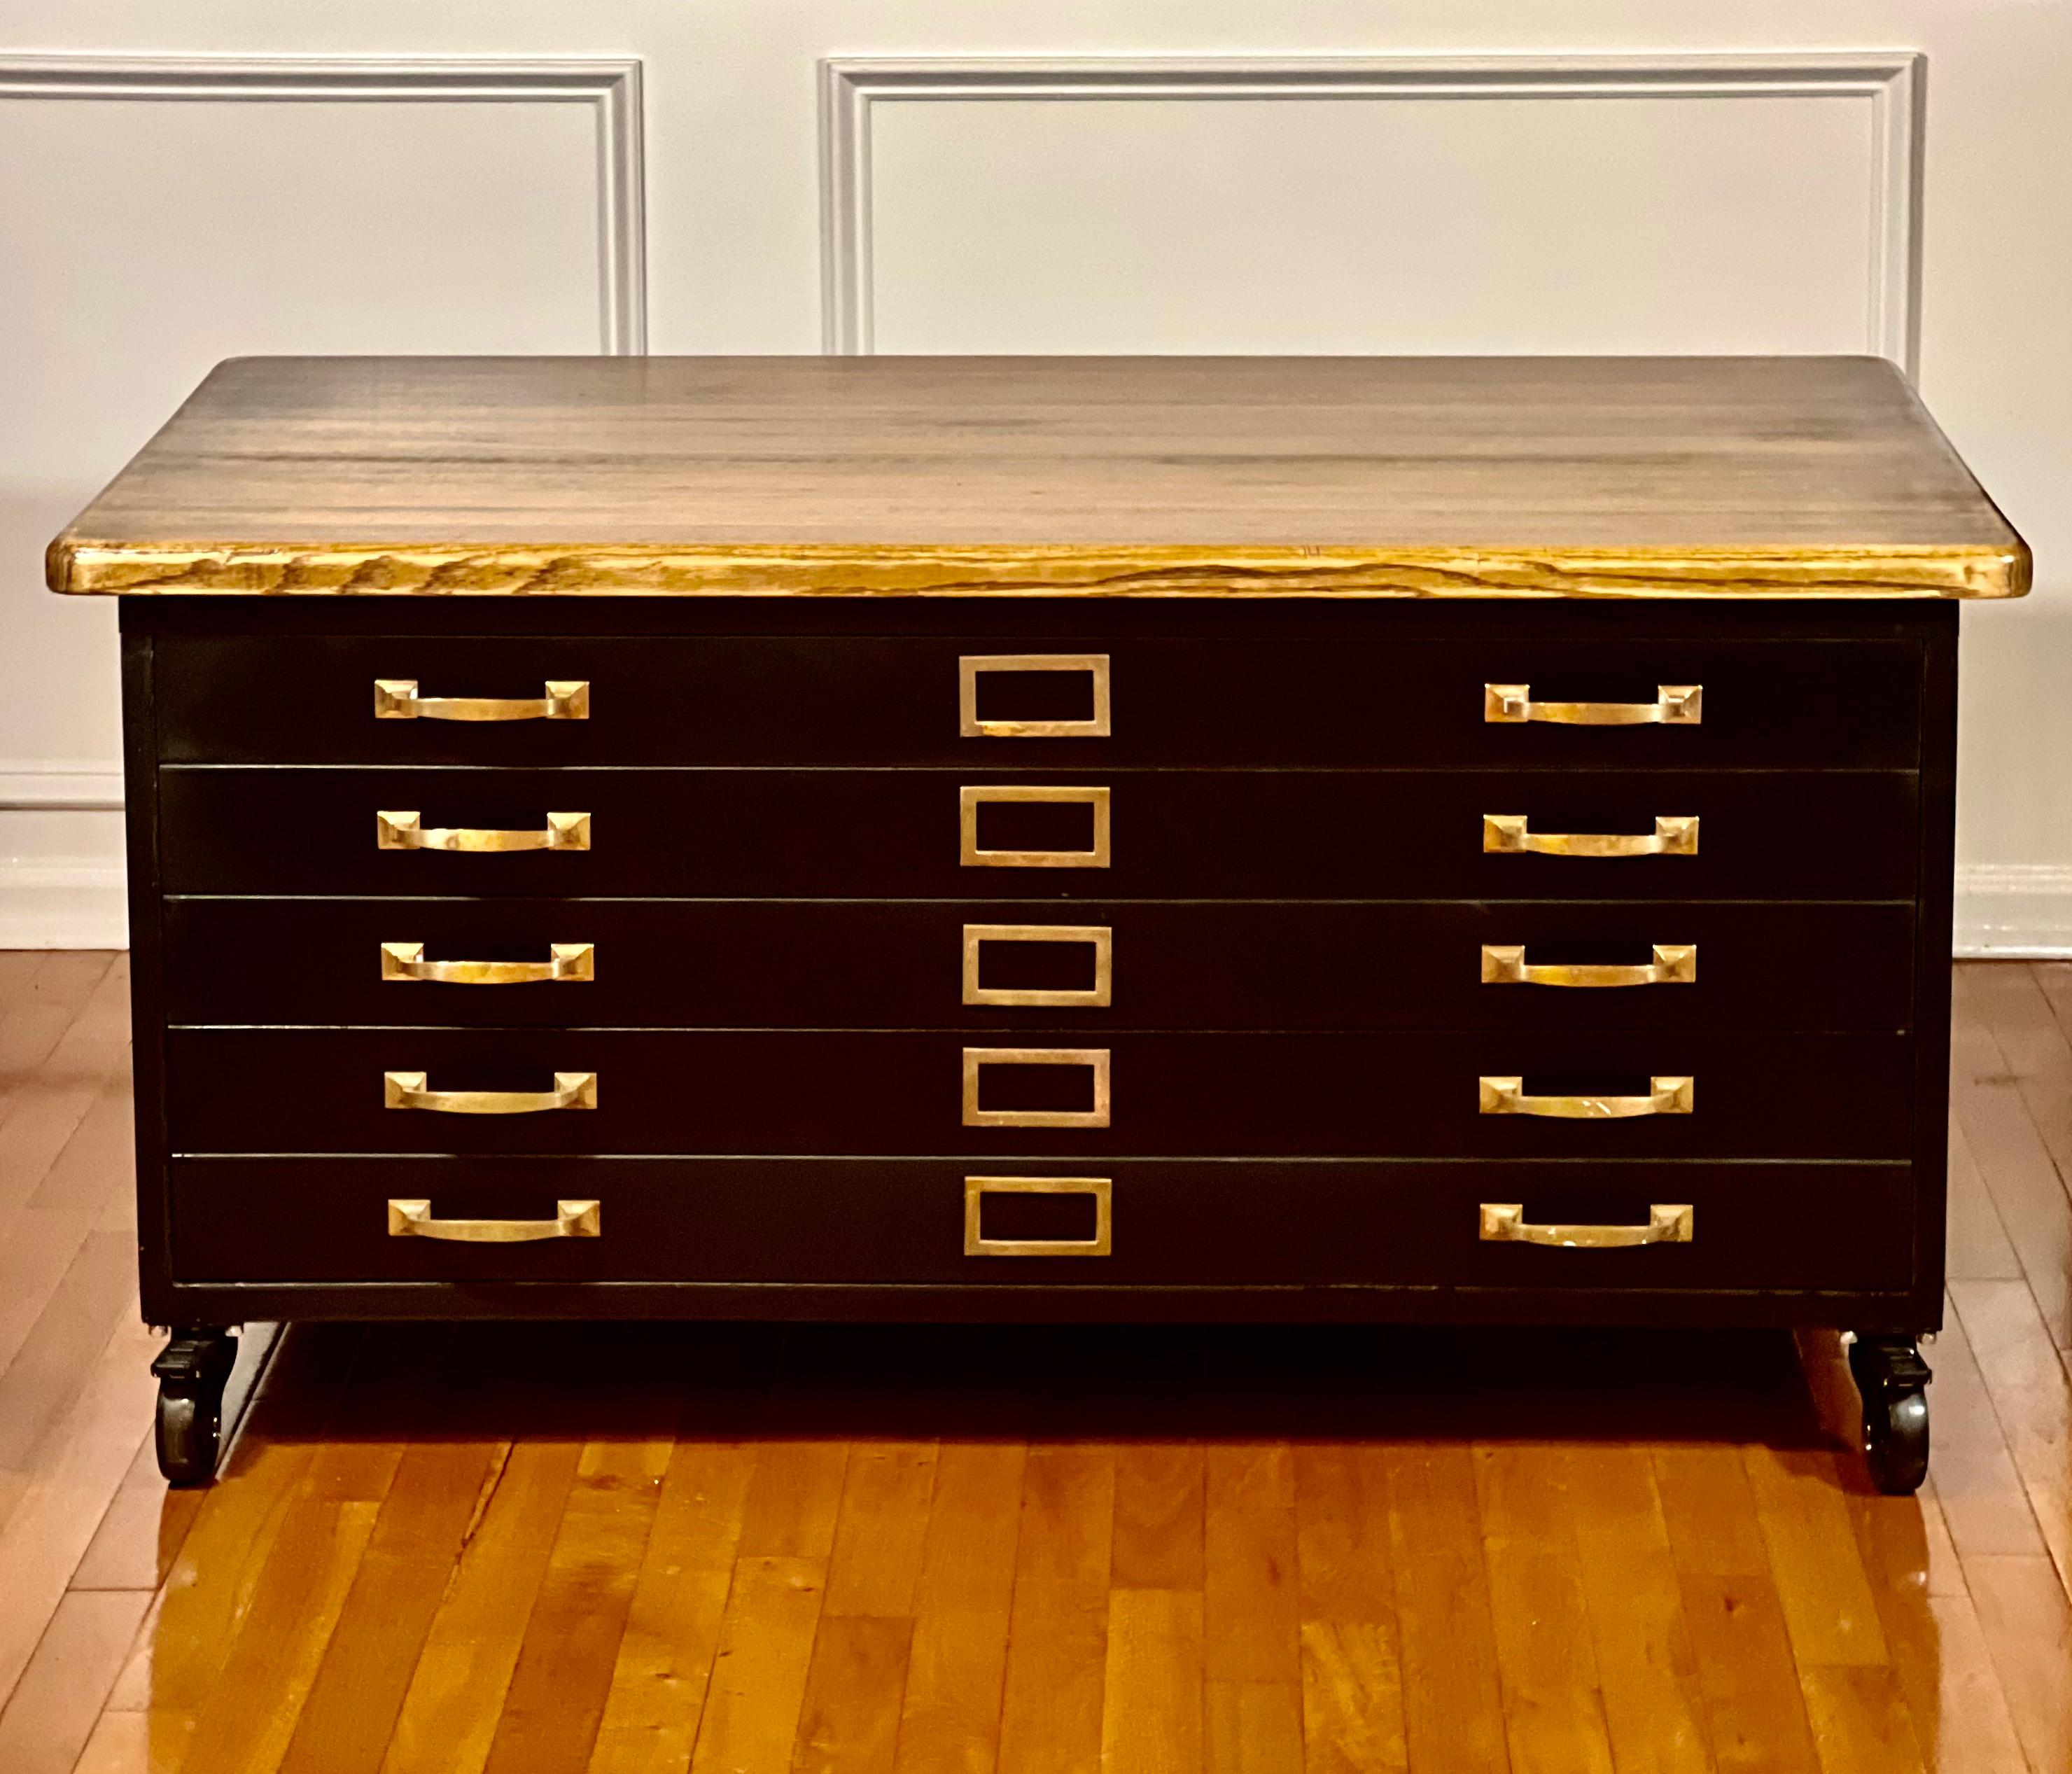 Vintage Globe Wernicke flat file cabinet, 1940's.

A steel architect's flat file cabinet repurposed for use as a coffee table. It has been refinished in black with the addition of a unique, reclaimed wood top and heavy duty casters with a simple